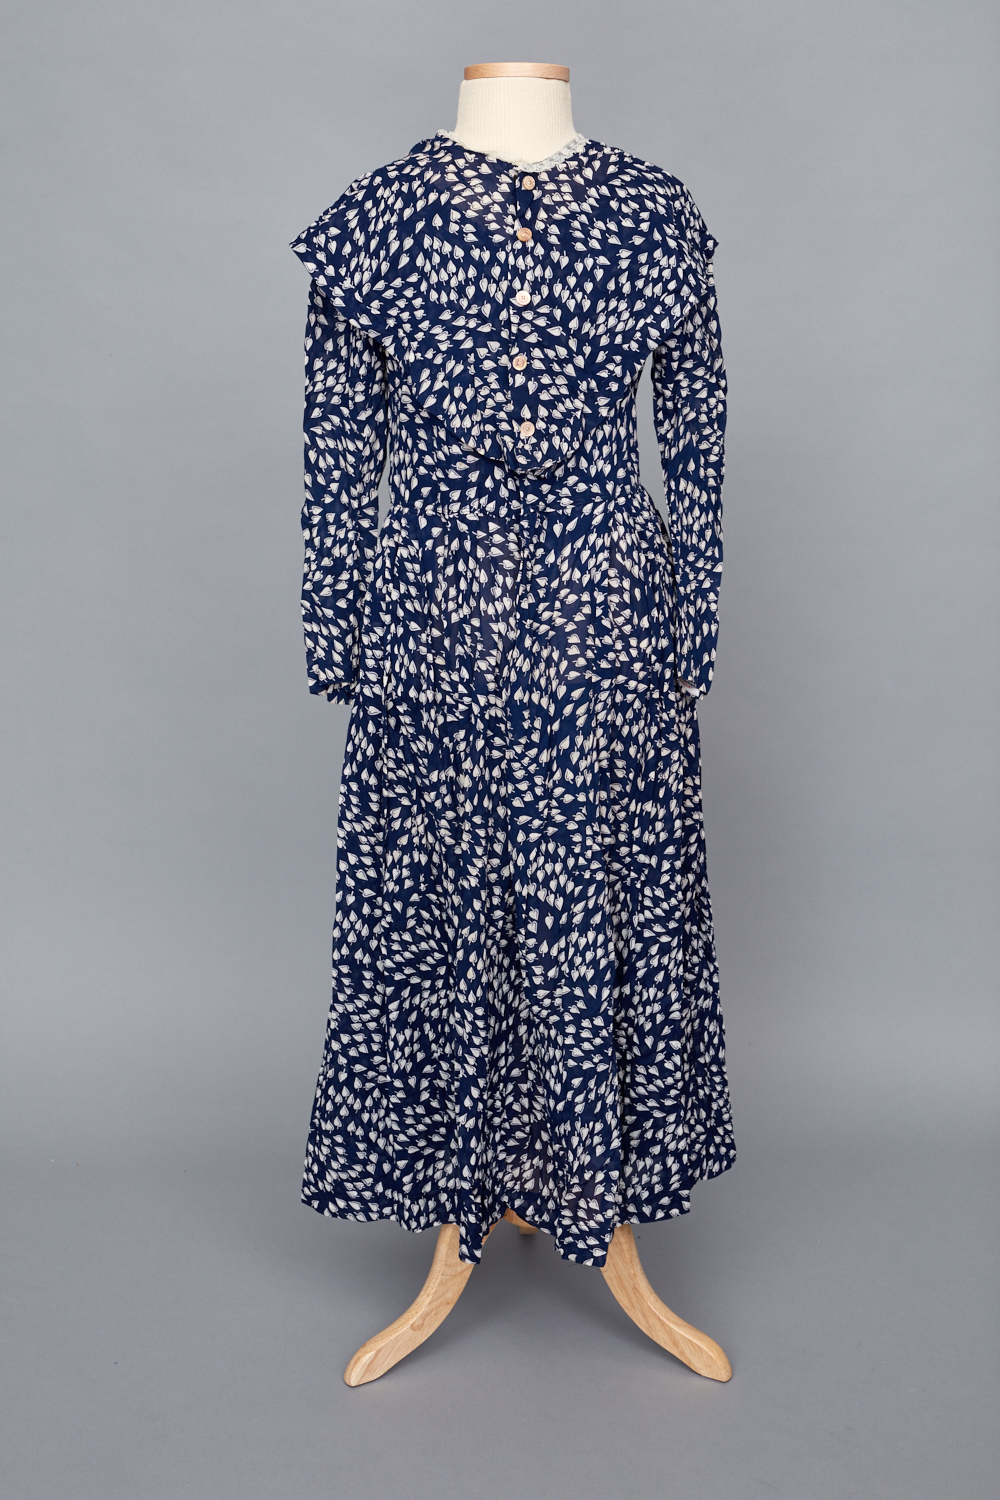 A blue and white floral dress on a mannequin.